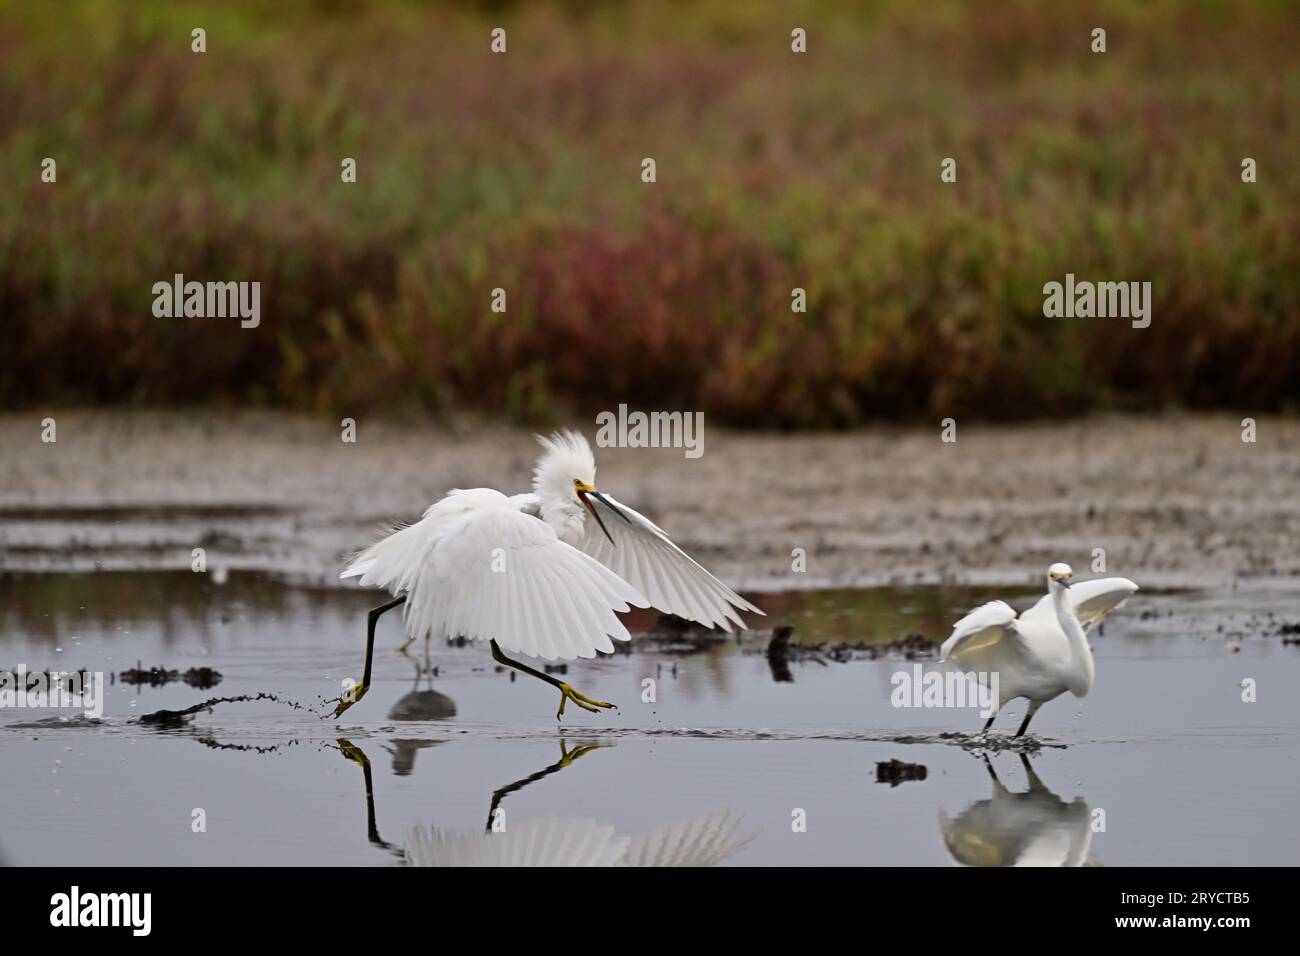 A Snowy Egret chasing another Stock Photo